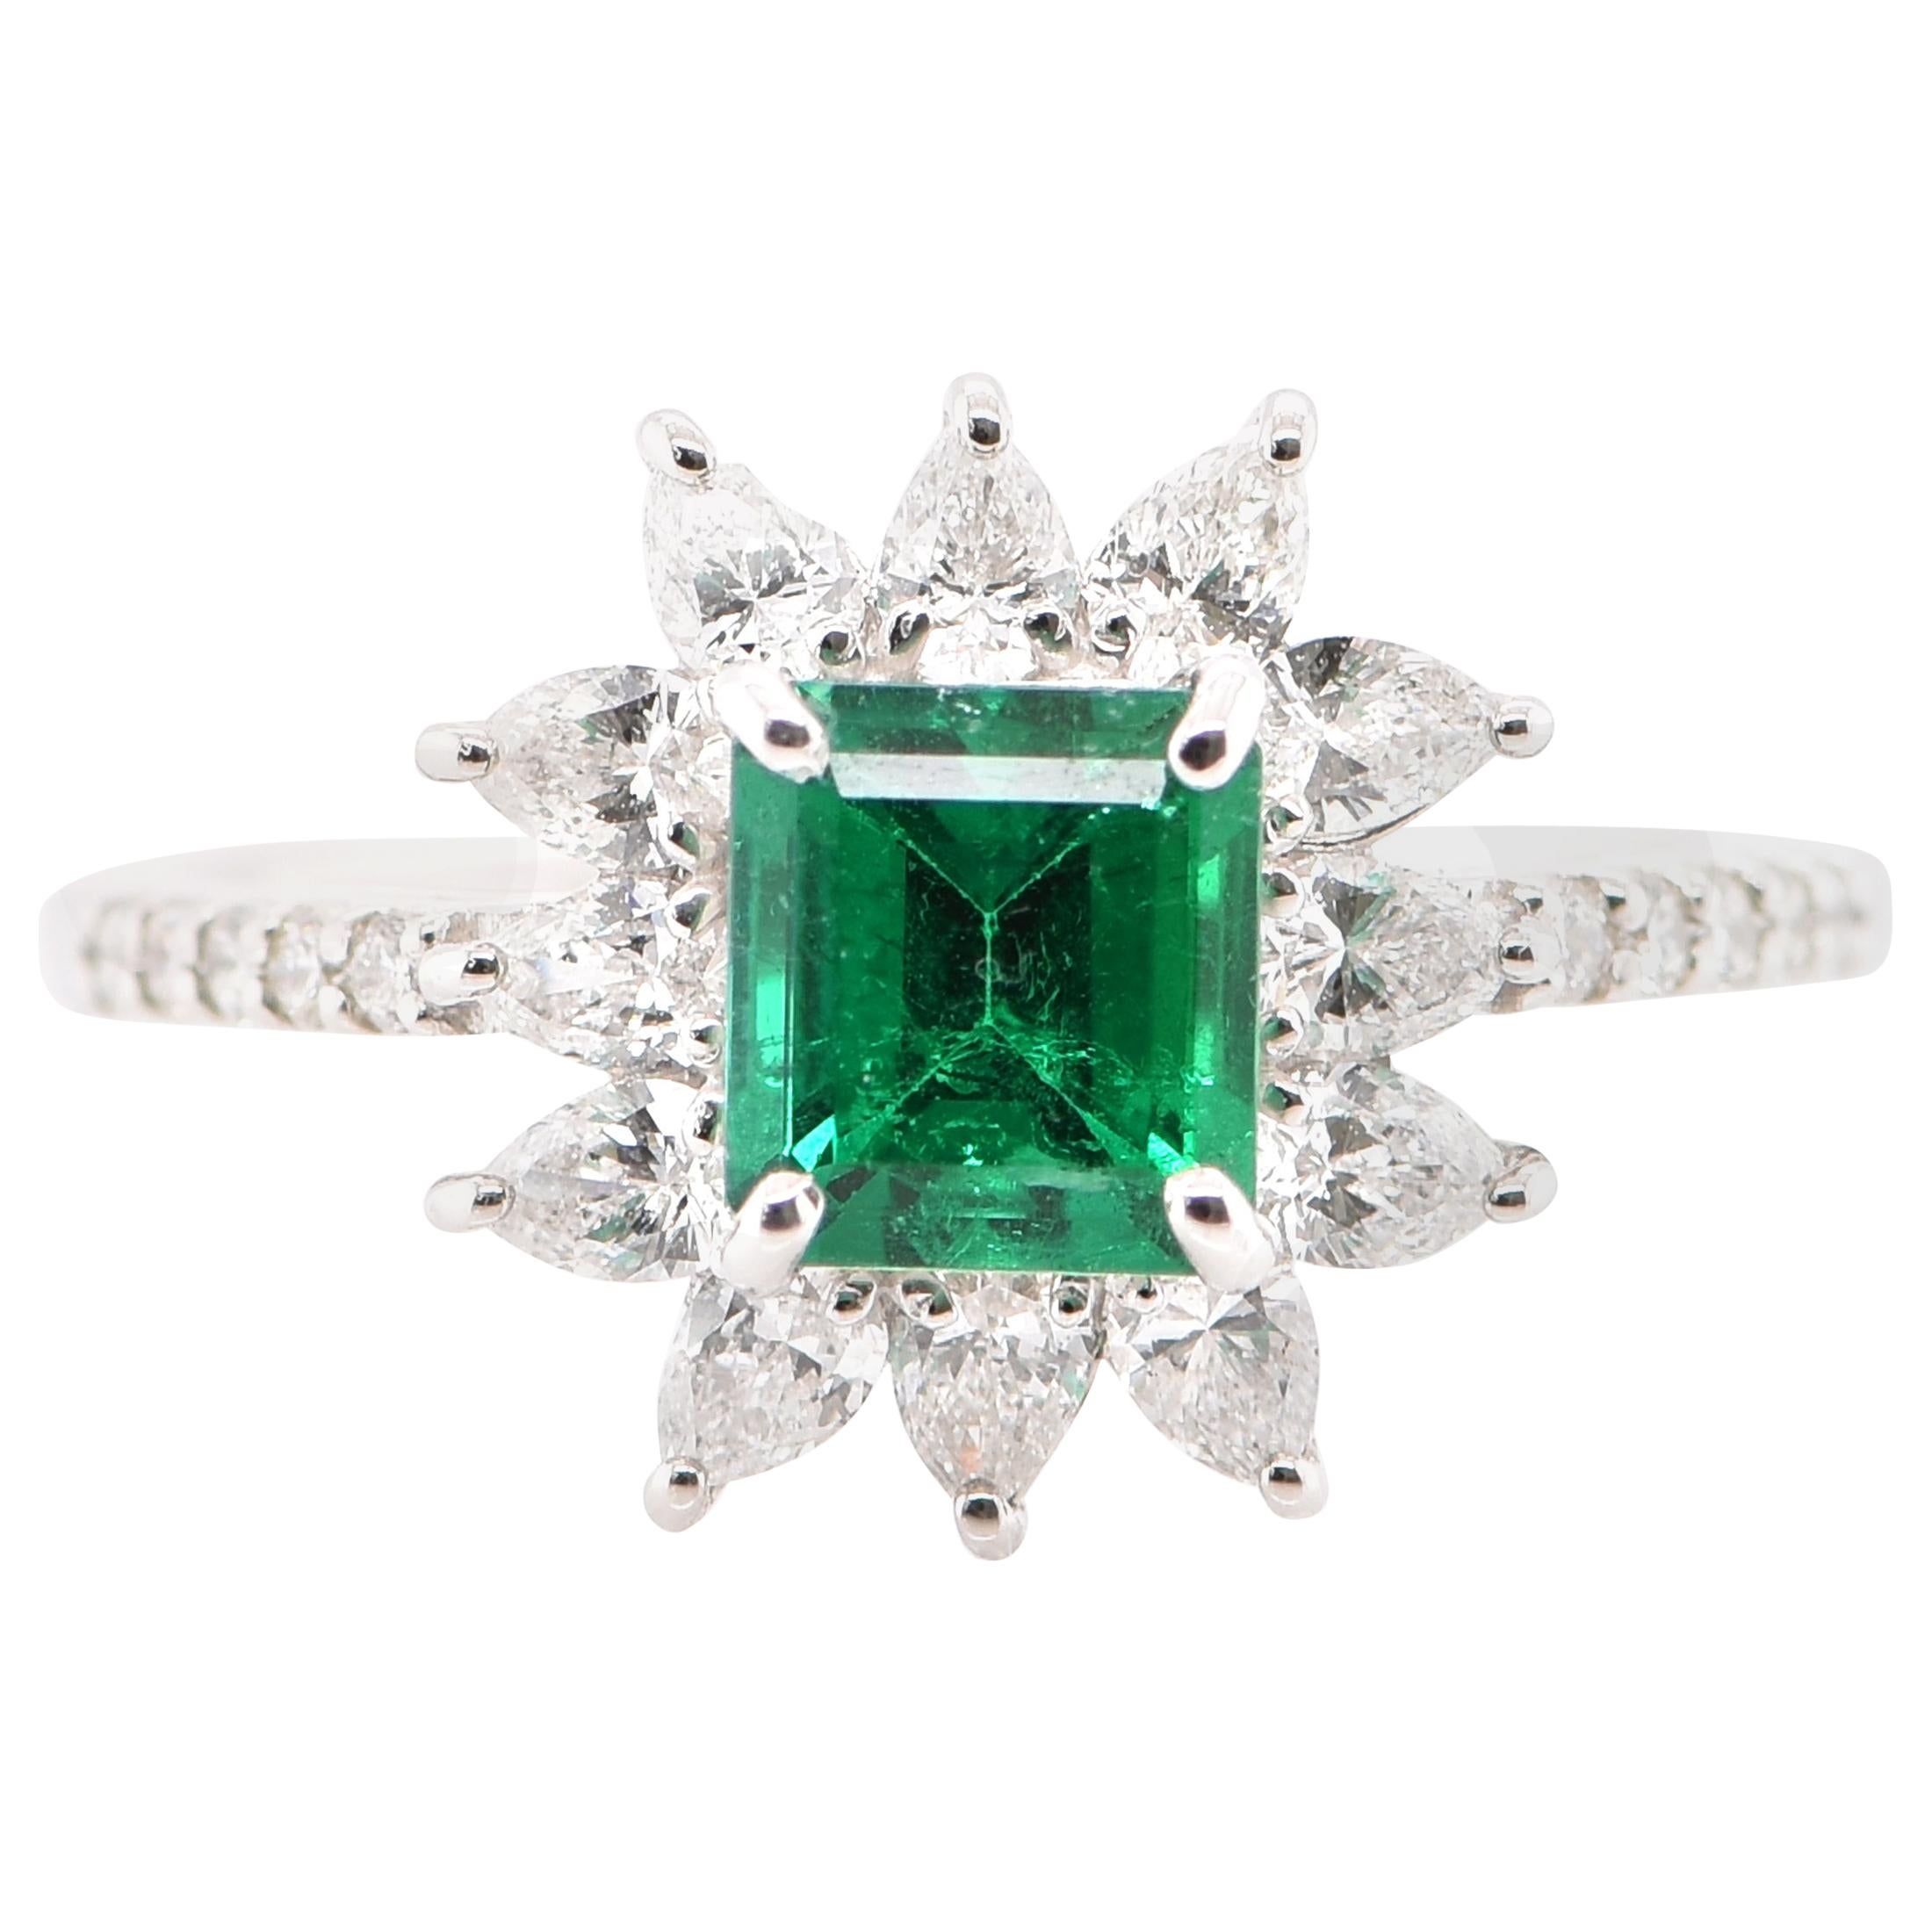 GIA Certified 0.91 Carat Untreated 'No Oil' Colombian Emerald Ring